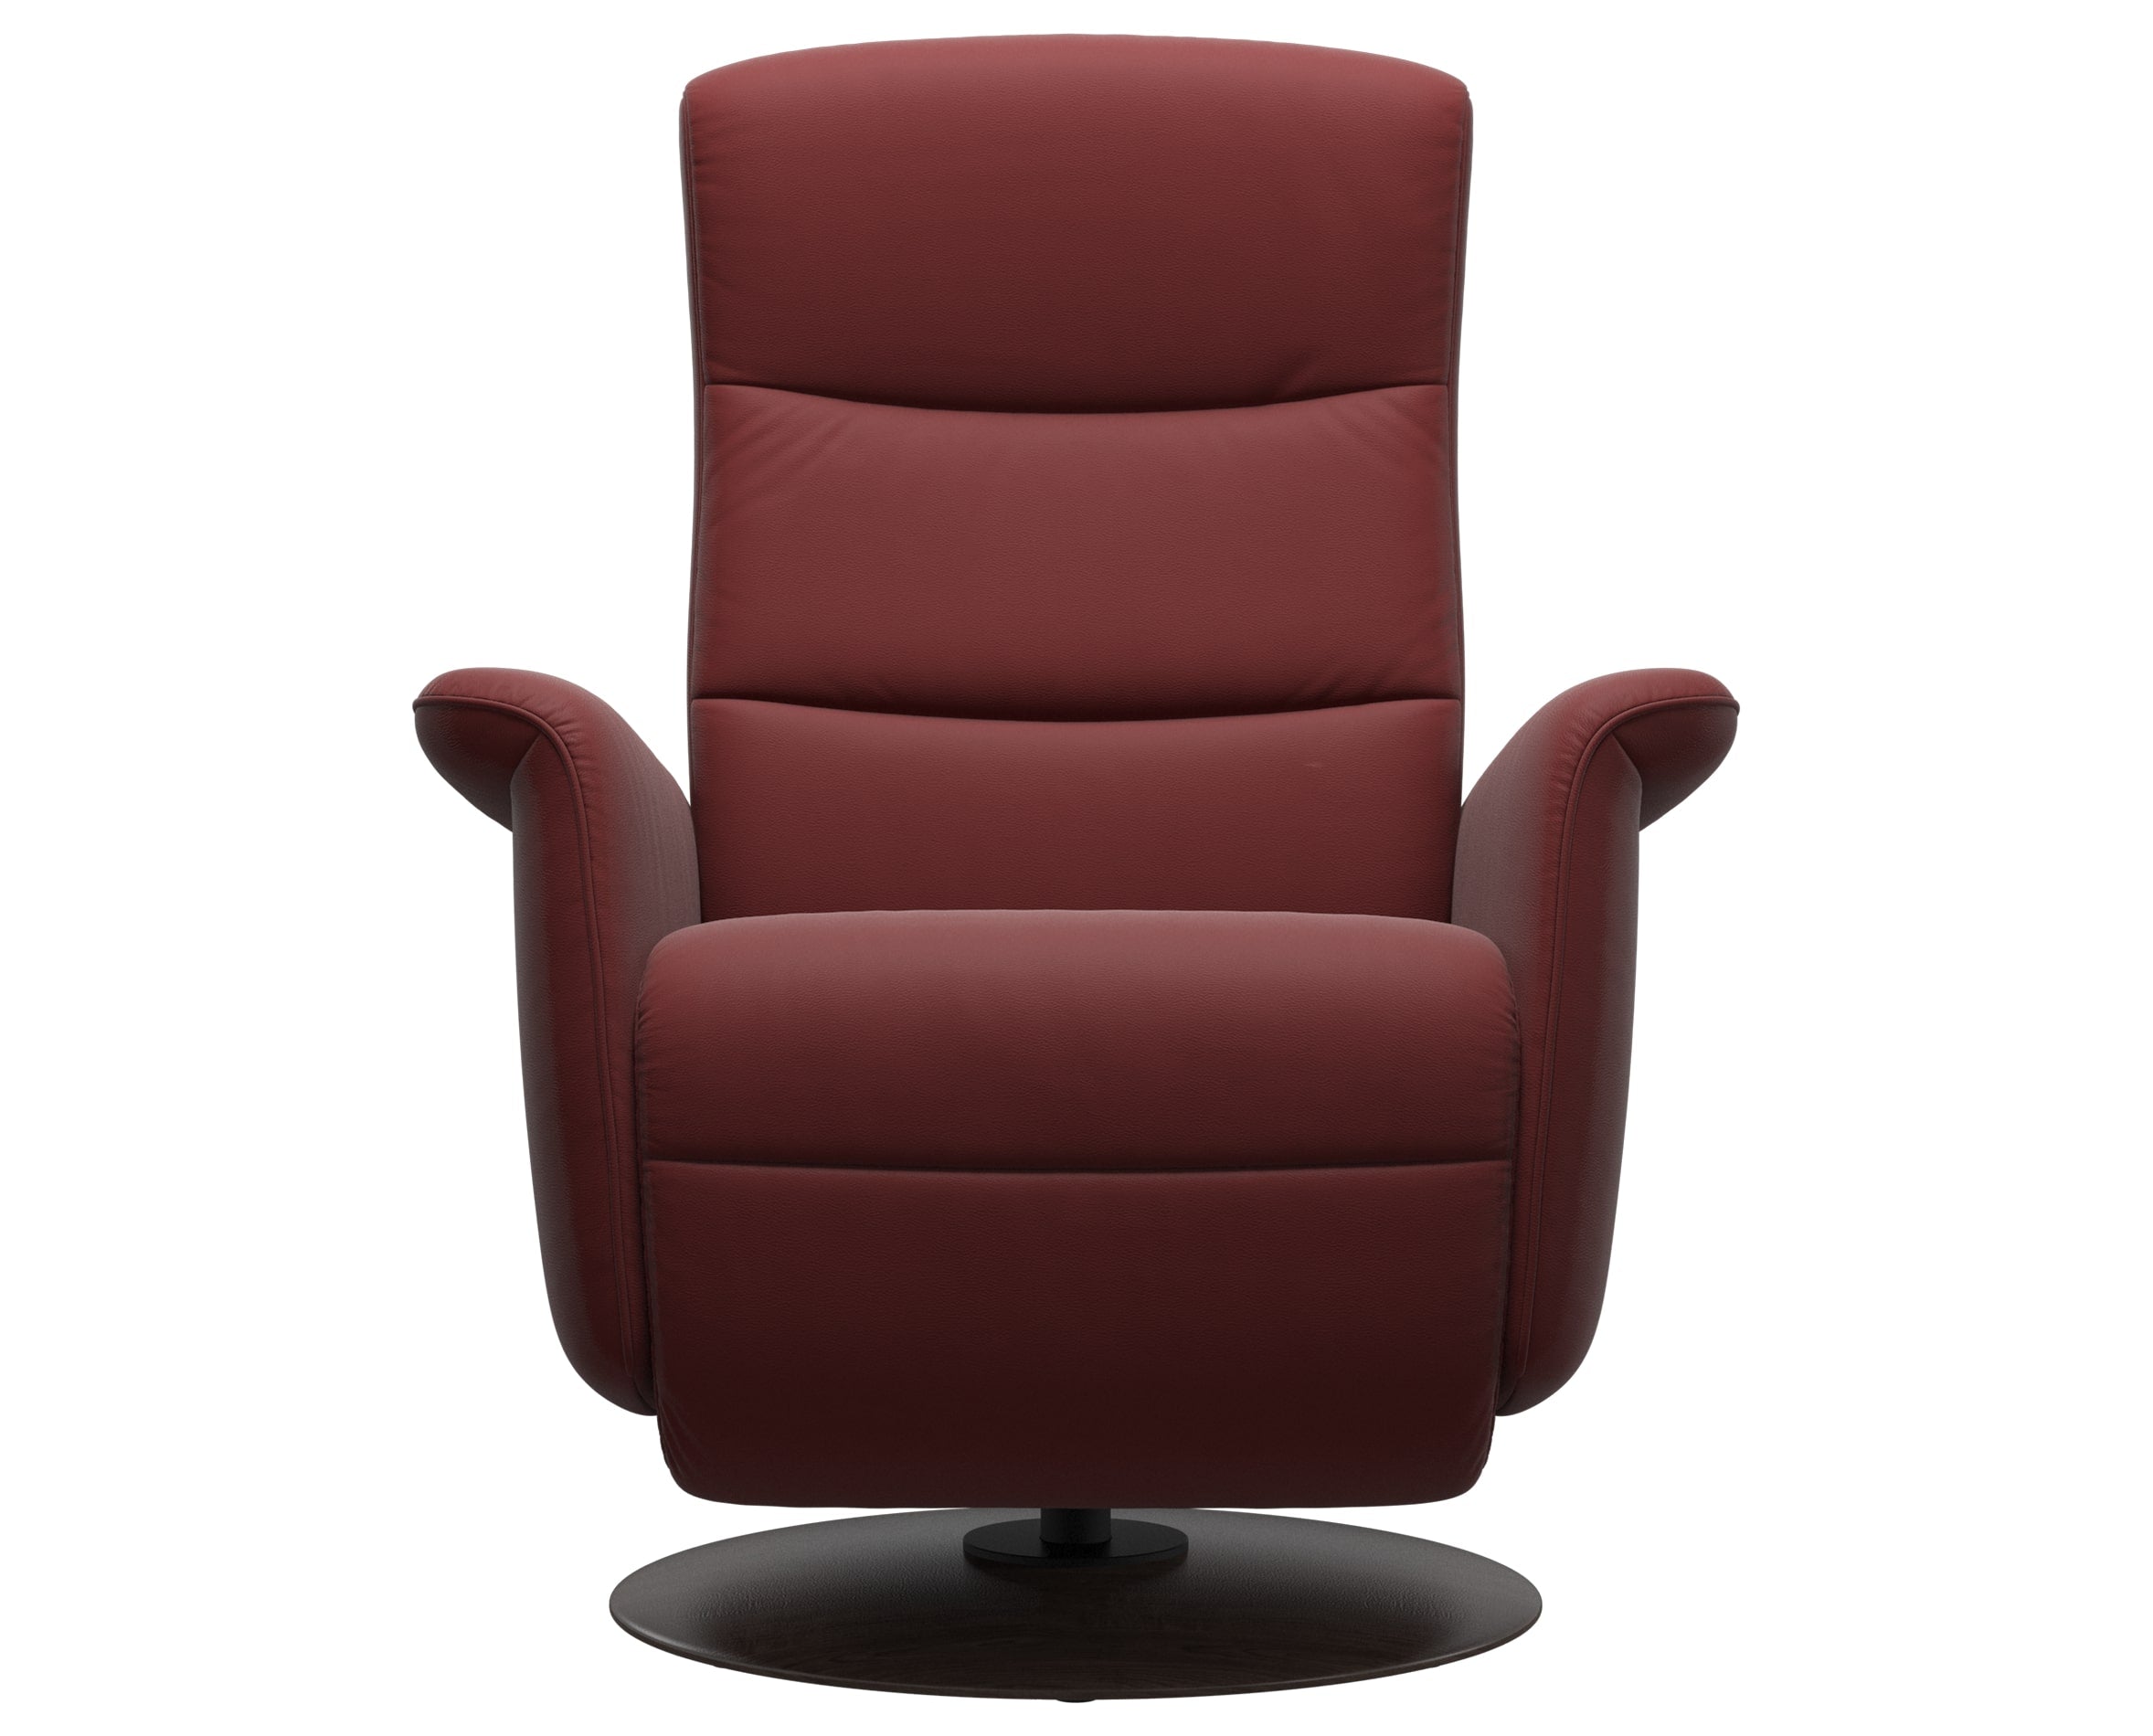 Paloma Leather Cherry S/M/L and Wenge Base | Stressless Mike Recliner | Valley Ridge Furniture